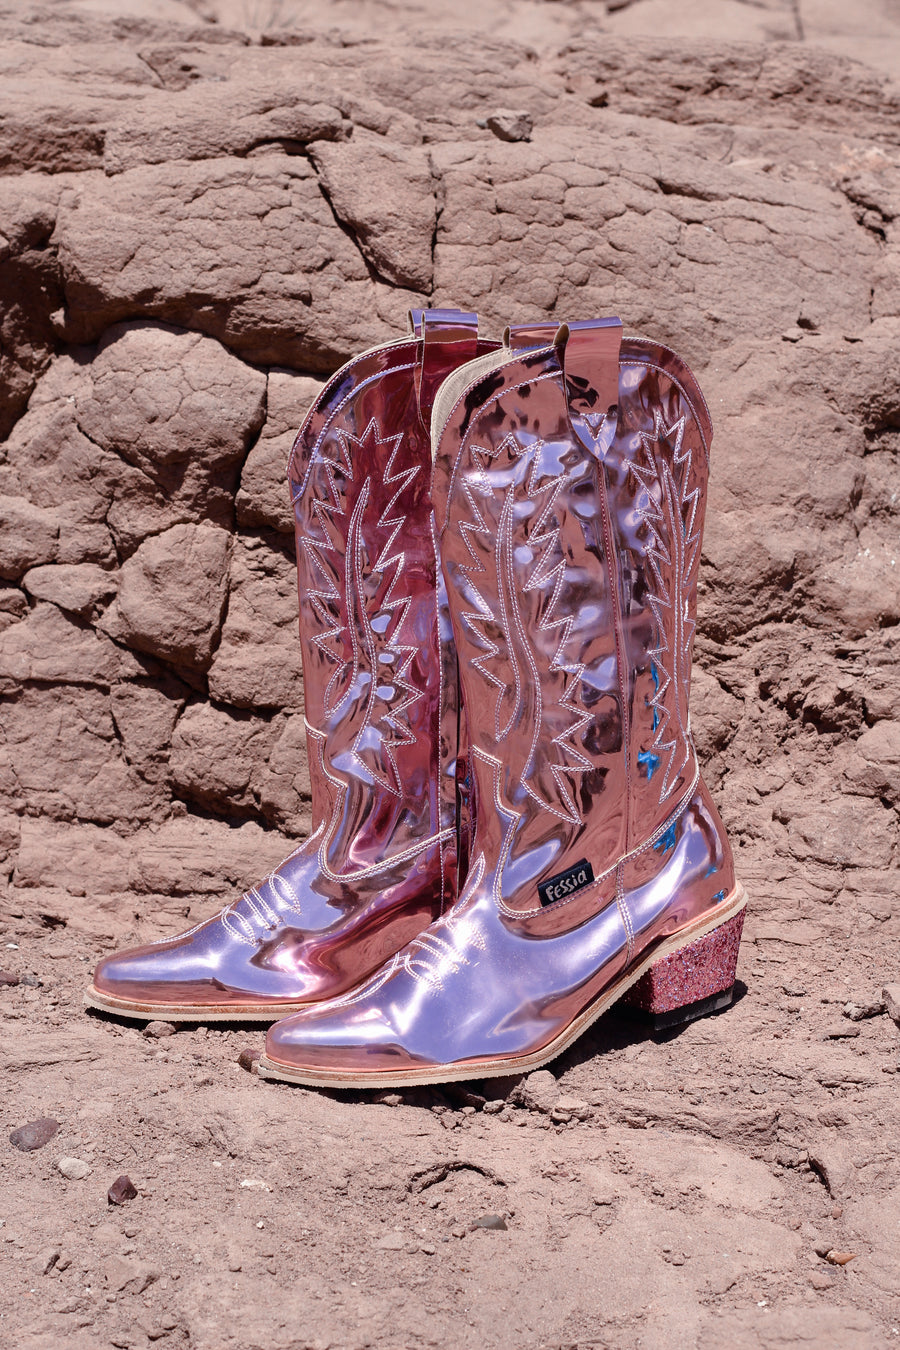 THE PINK COWGIRL BOOT